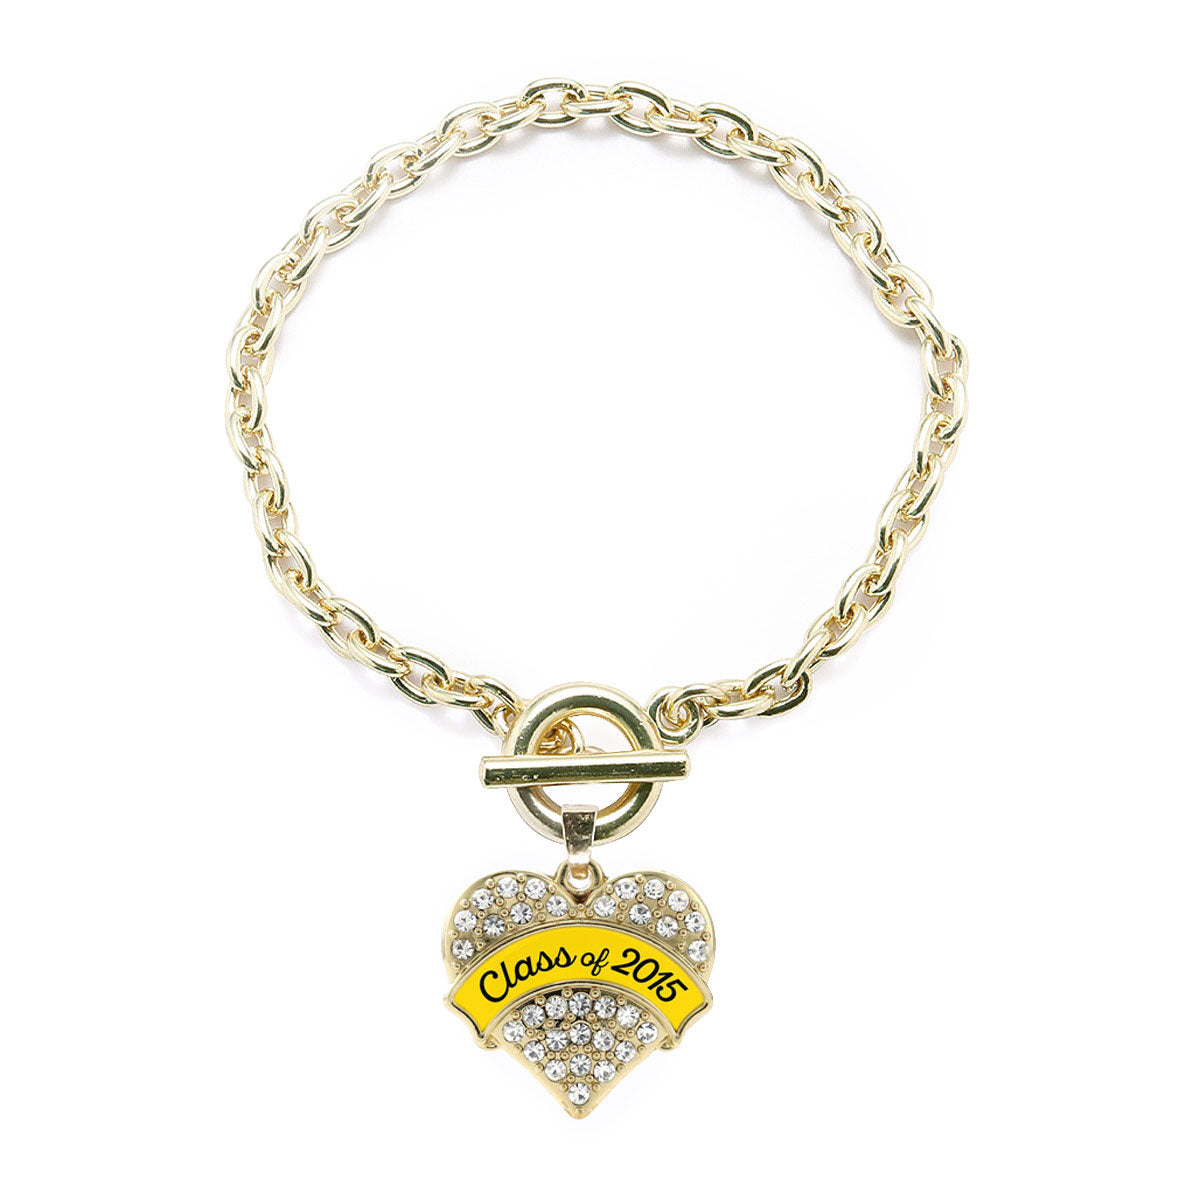 Gold Class of 2015 - Yellow Pave Heart Charm Toggle Bracelet